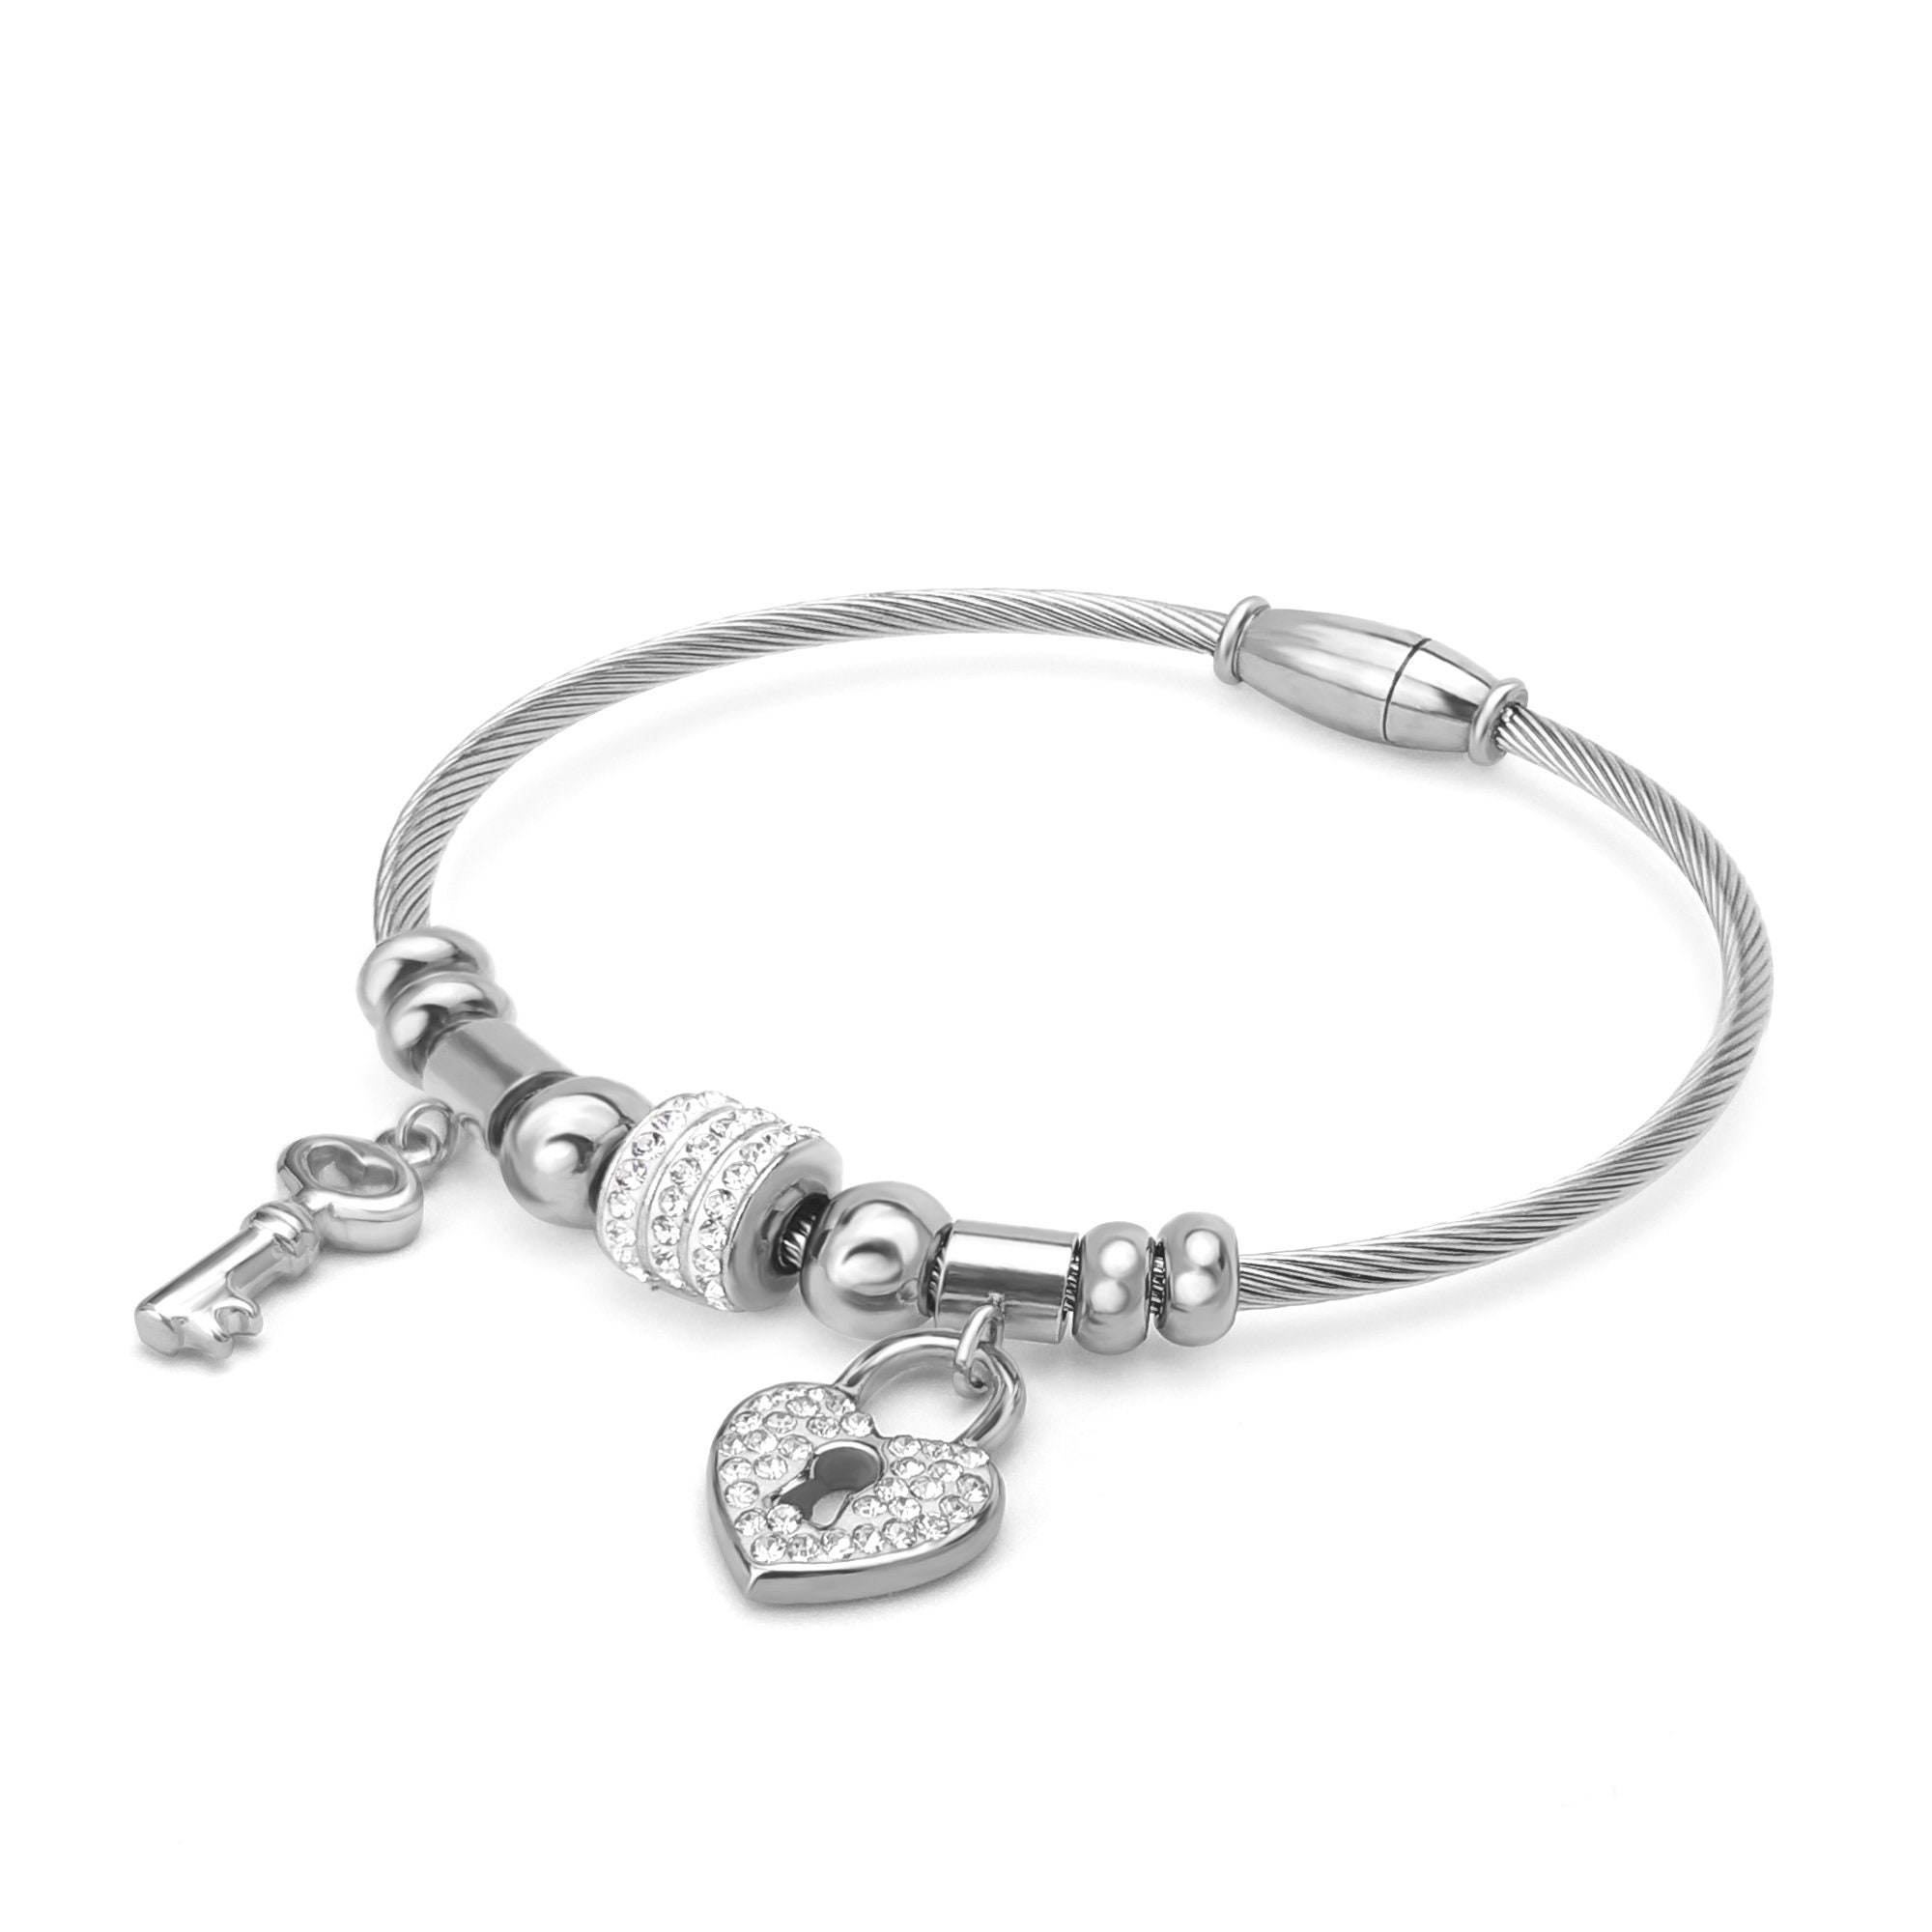 Heart Lock With Key Charm Bracelet Gift for Her Key to My - Etsy UK